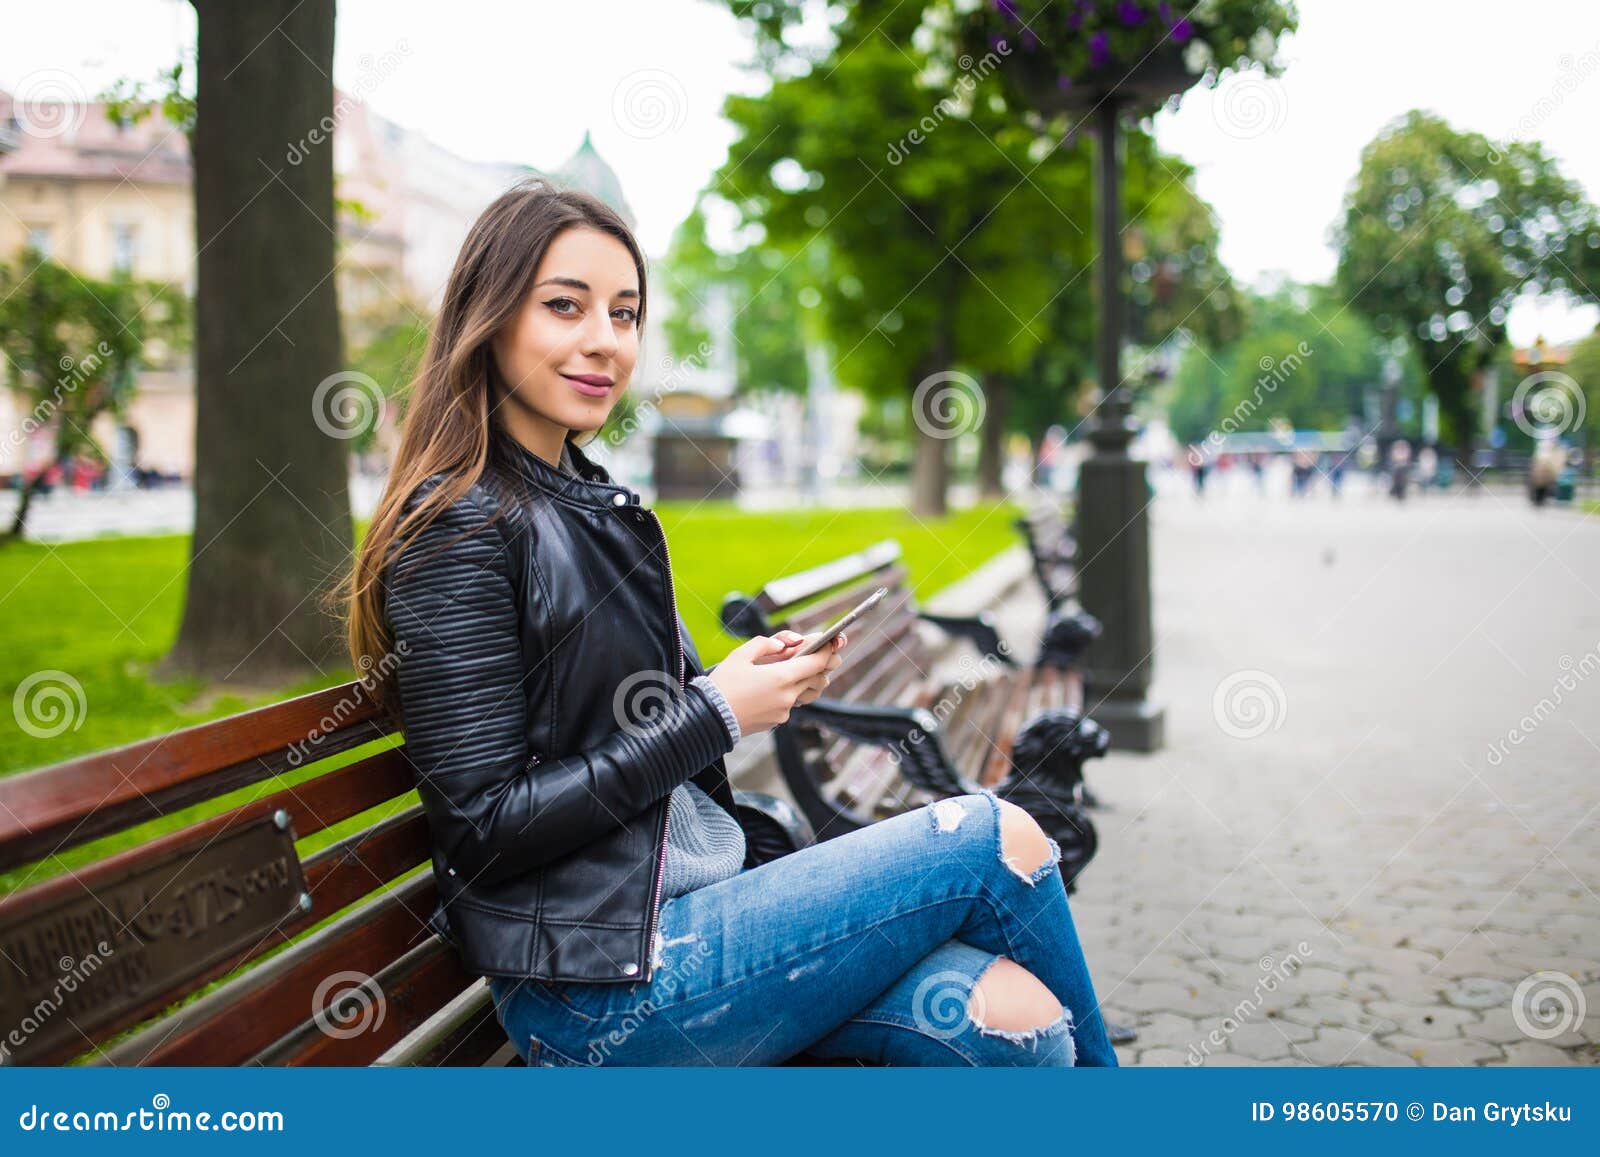 Young Woman Sitting On Bench On The Street And Using Her 